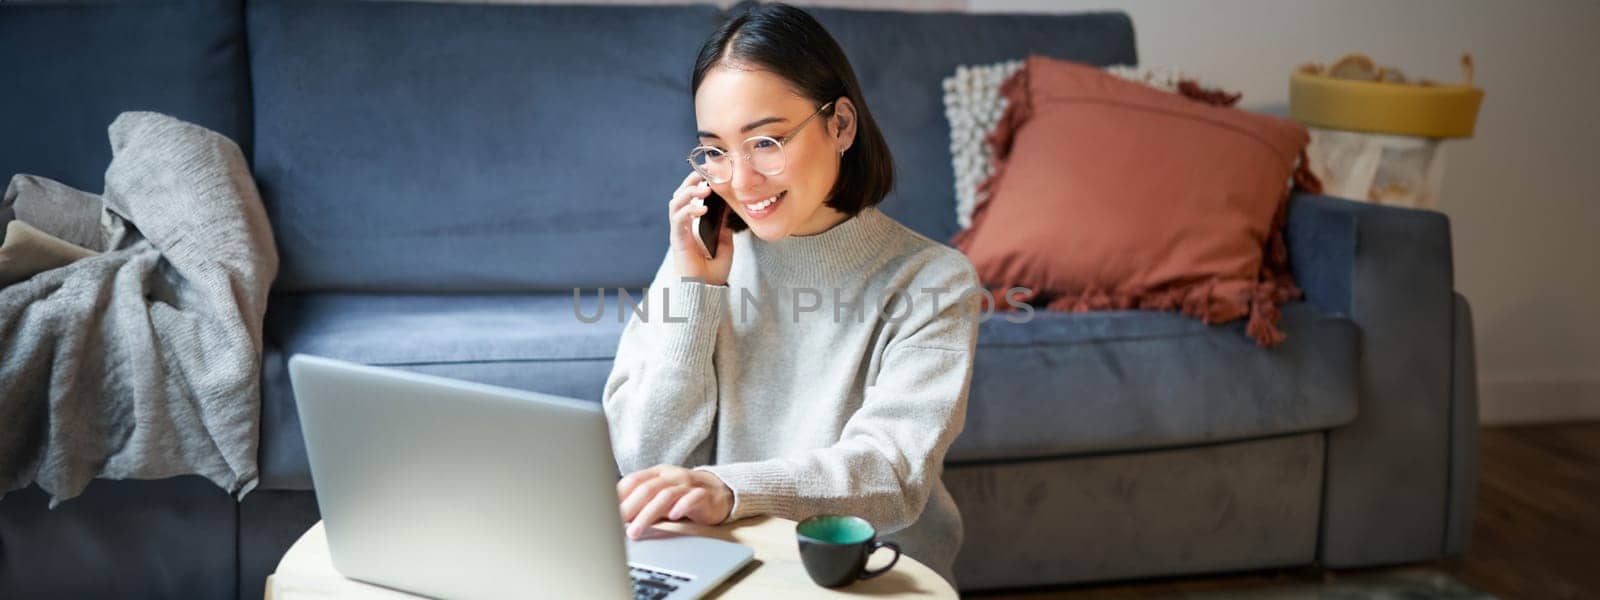 Portrait of smiling asian woman making phone call, working on laptop and having conversation on smartphone.